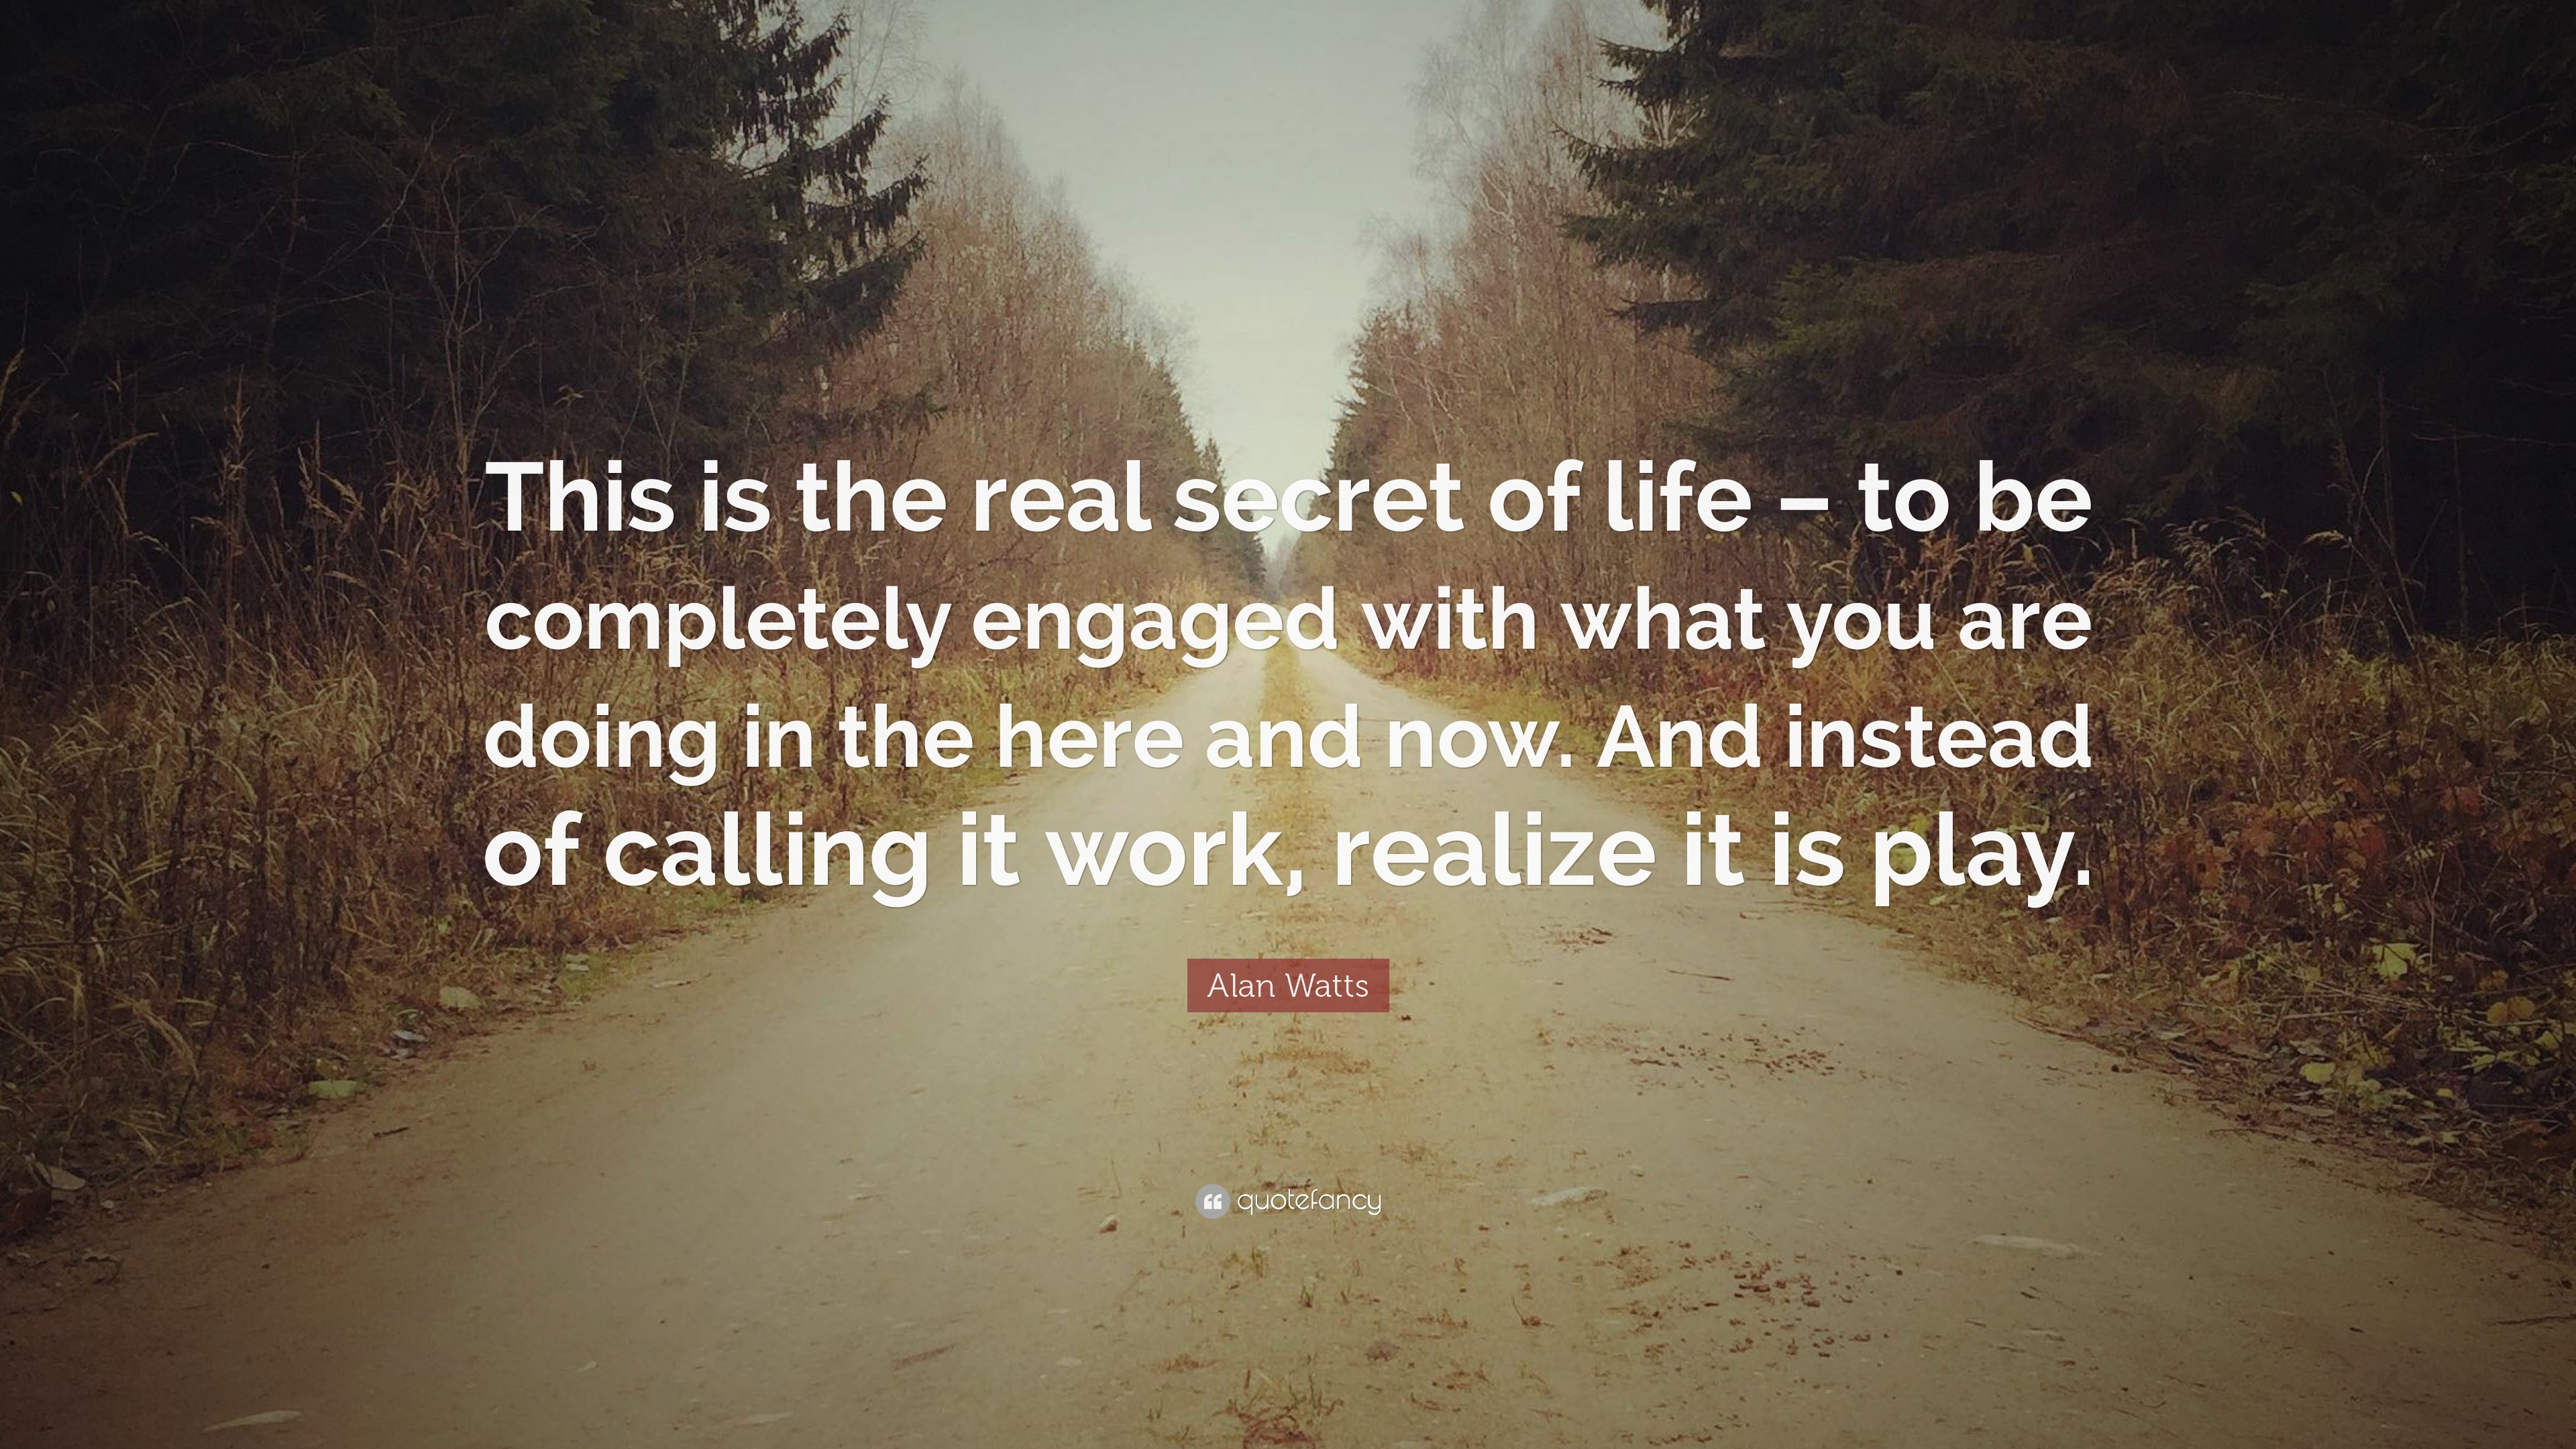 Alan Watts Quote: “This is the real secret of life – to be completely